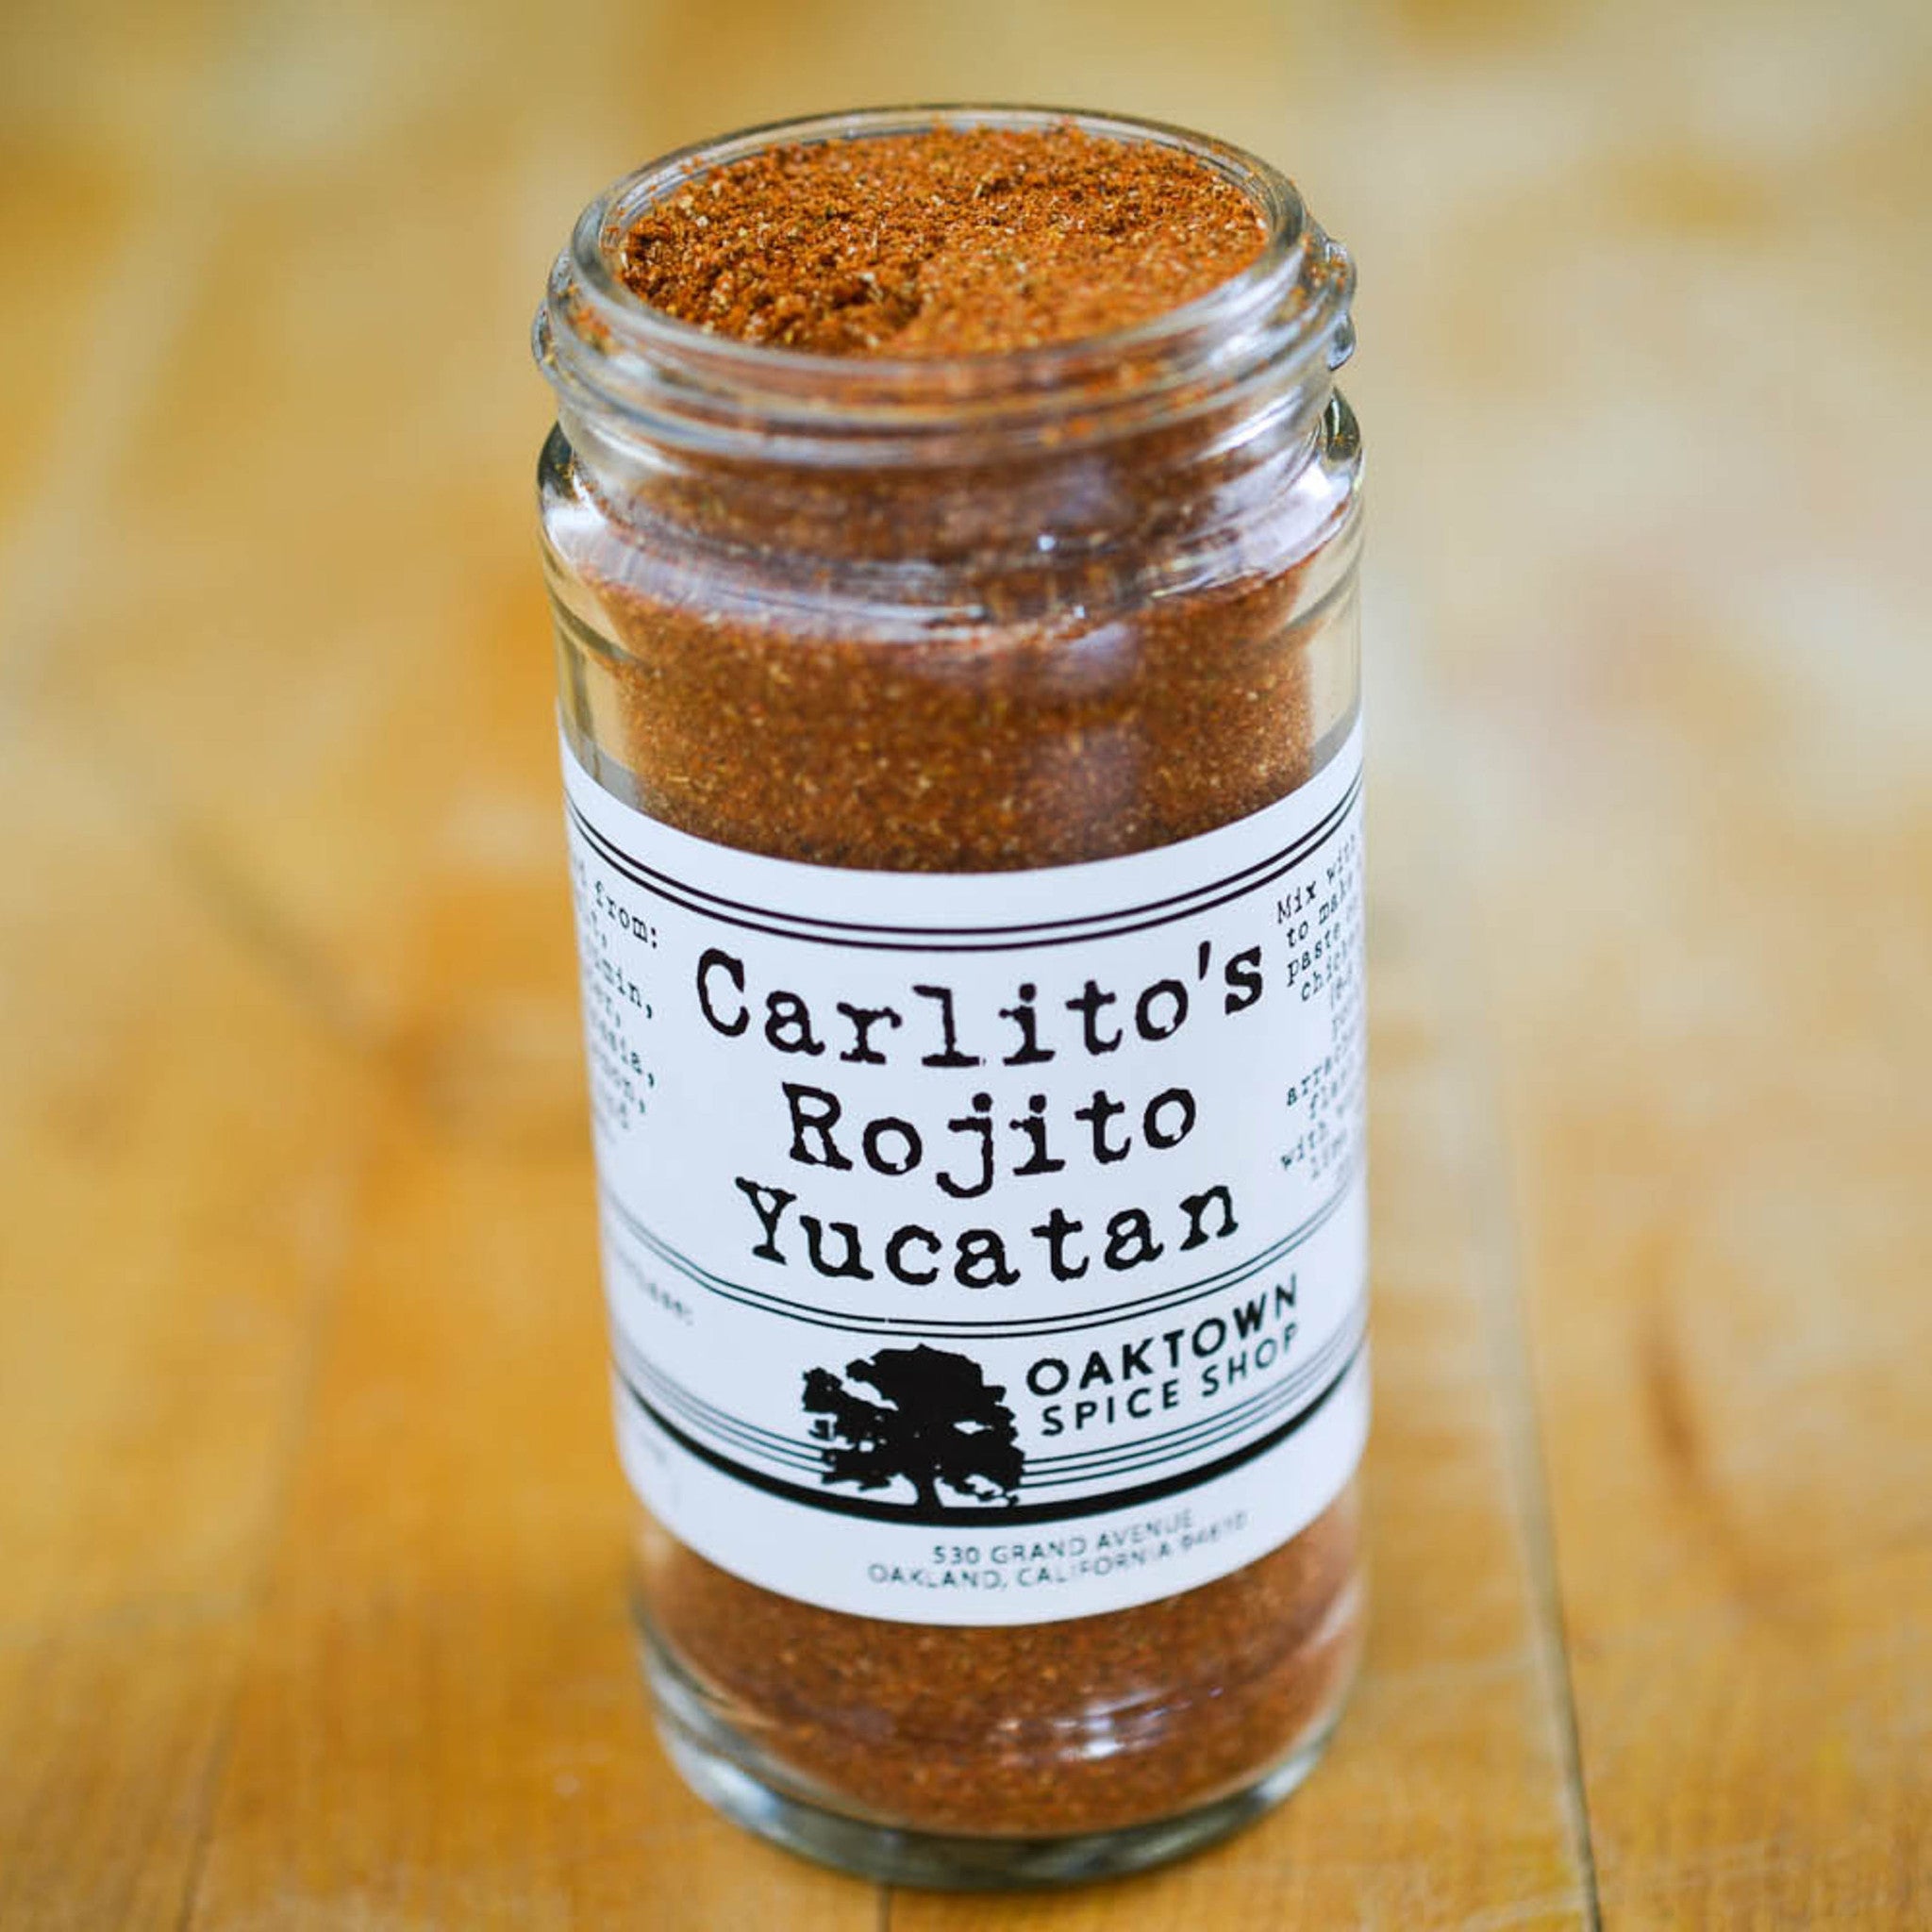 Carlito's Rojito Yucatan Rub with Citrus Onion Garlic and Aromatic Spices such as Coves Fresh Ground from Oaktown Spice Shop